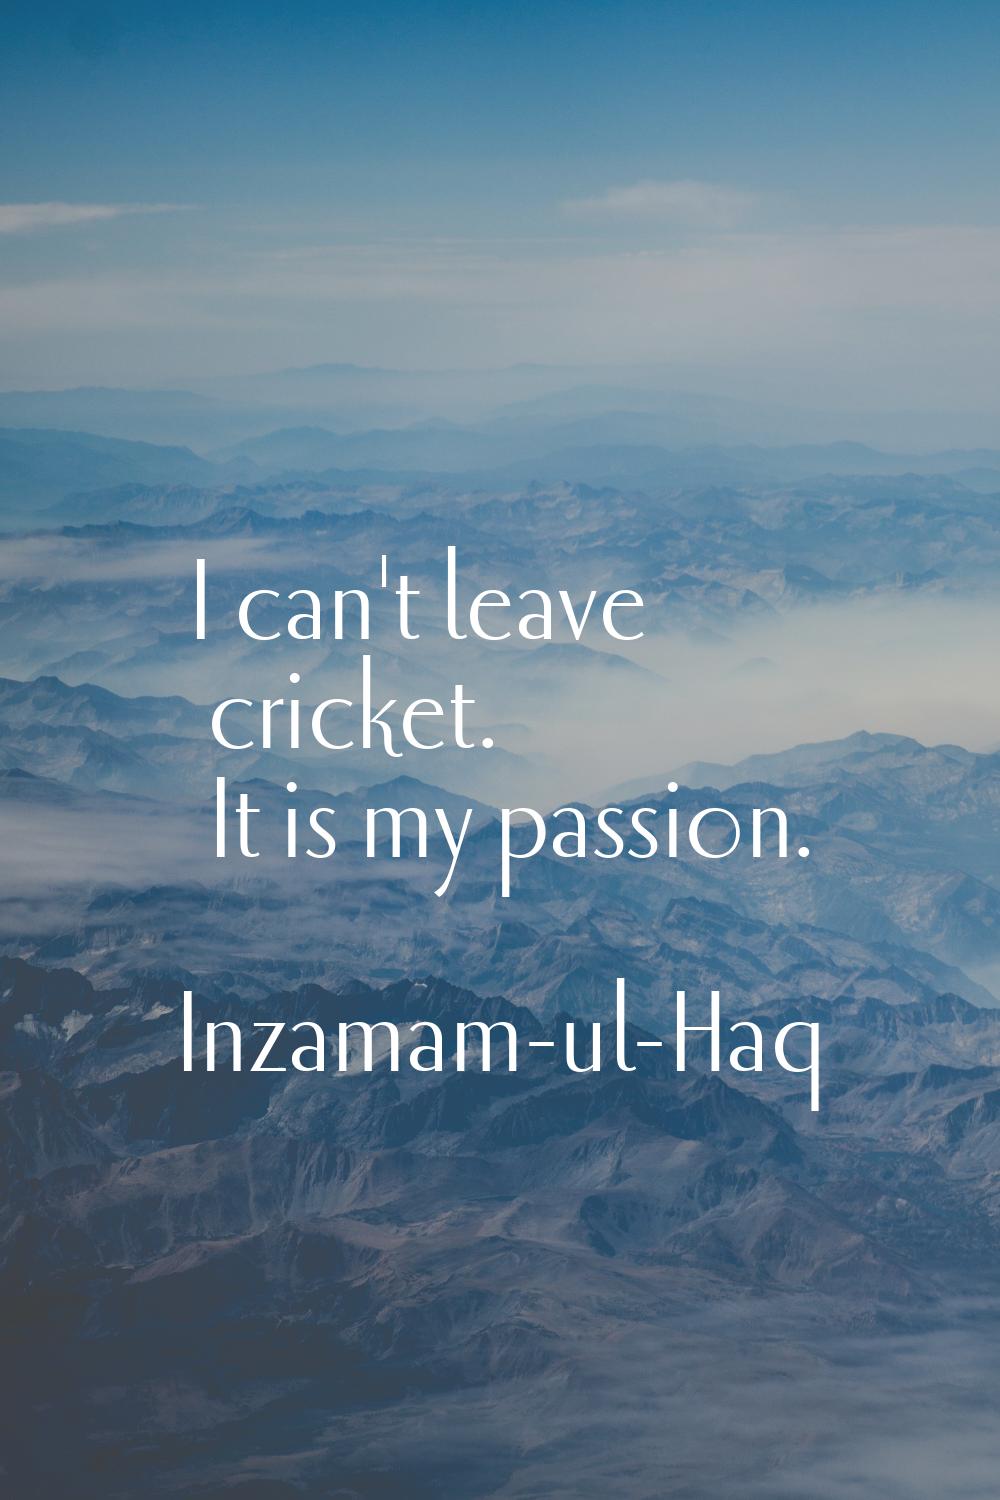 I can't leave cricket. It is my passion.